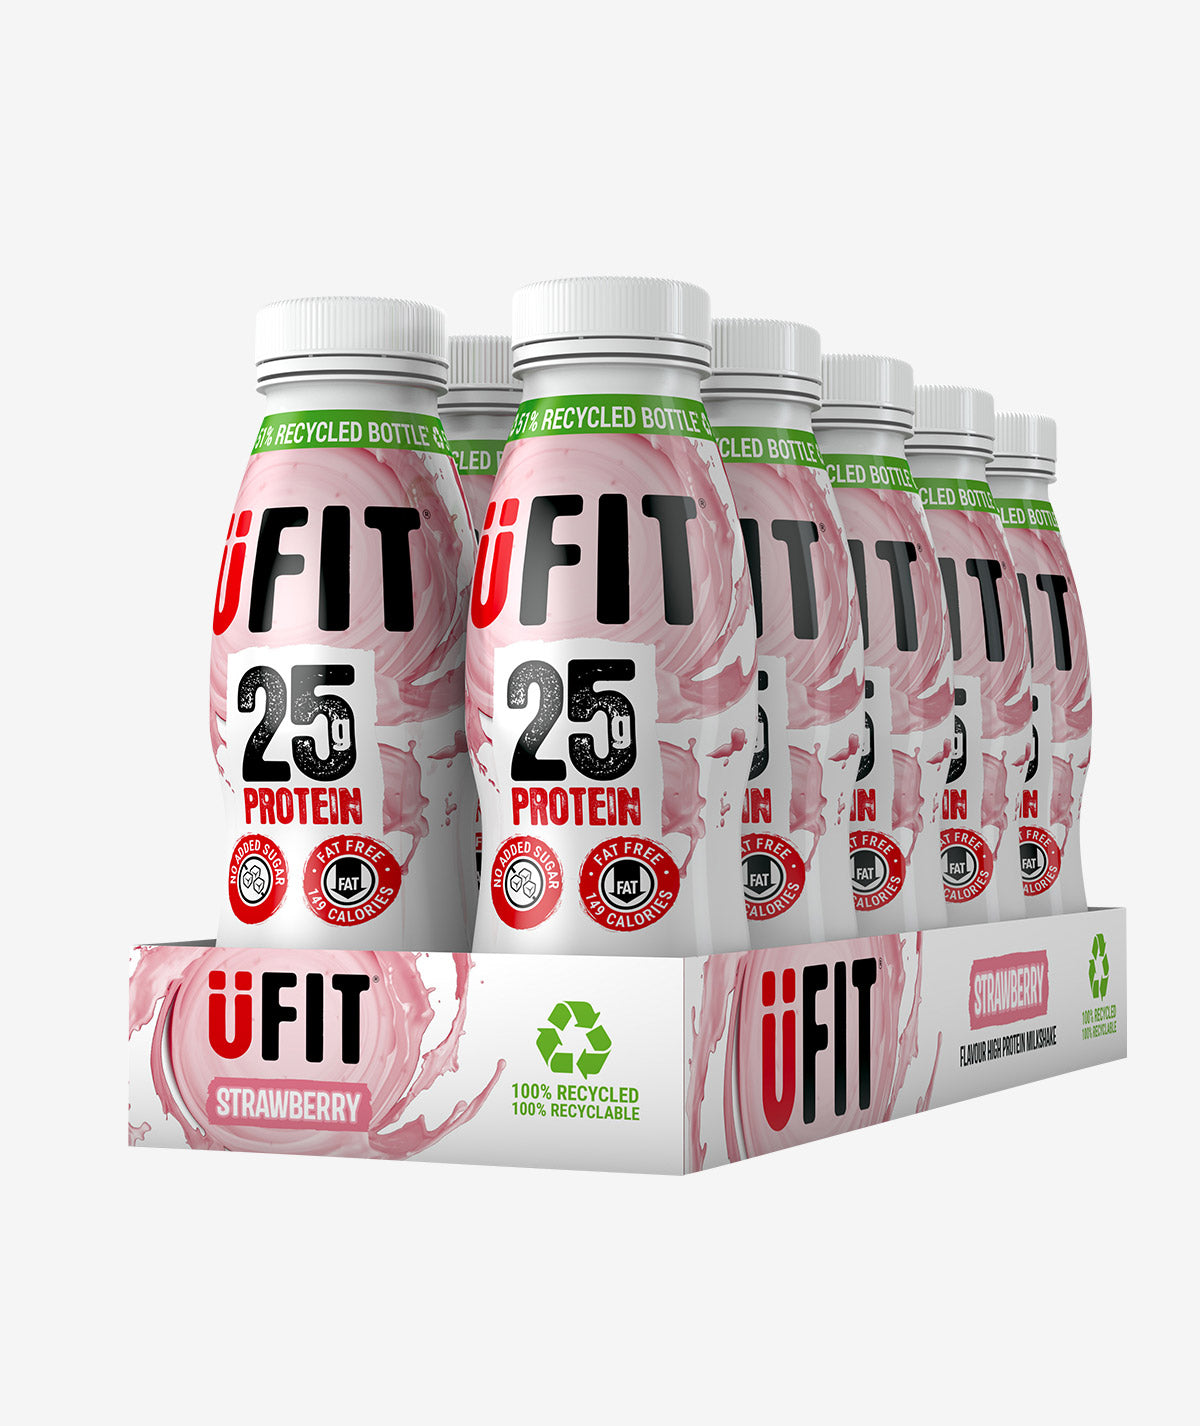 UFIT 25G PROTEIN - 3 CASES OF 10 FOR £36.99 (30 BOTTLES)